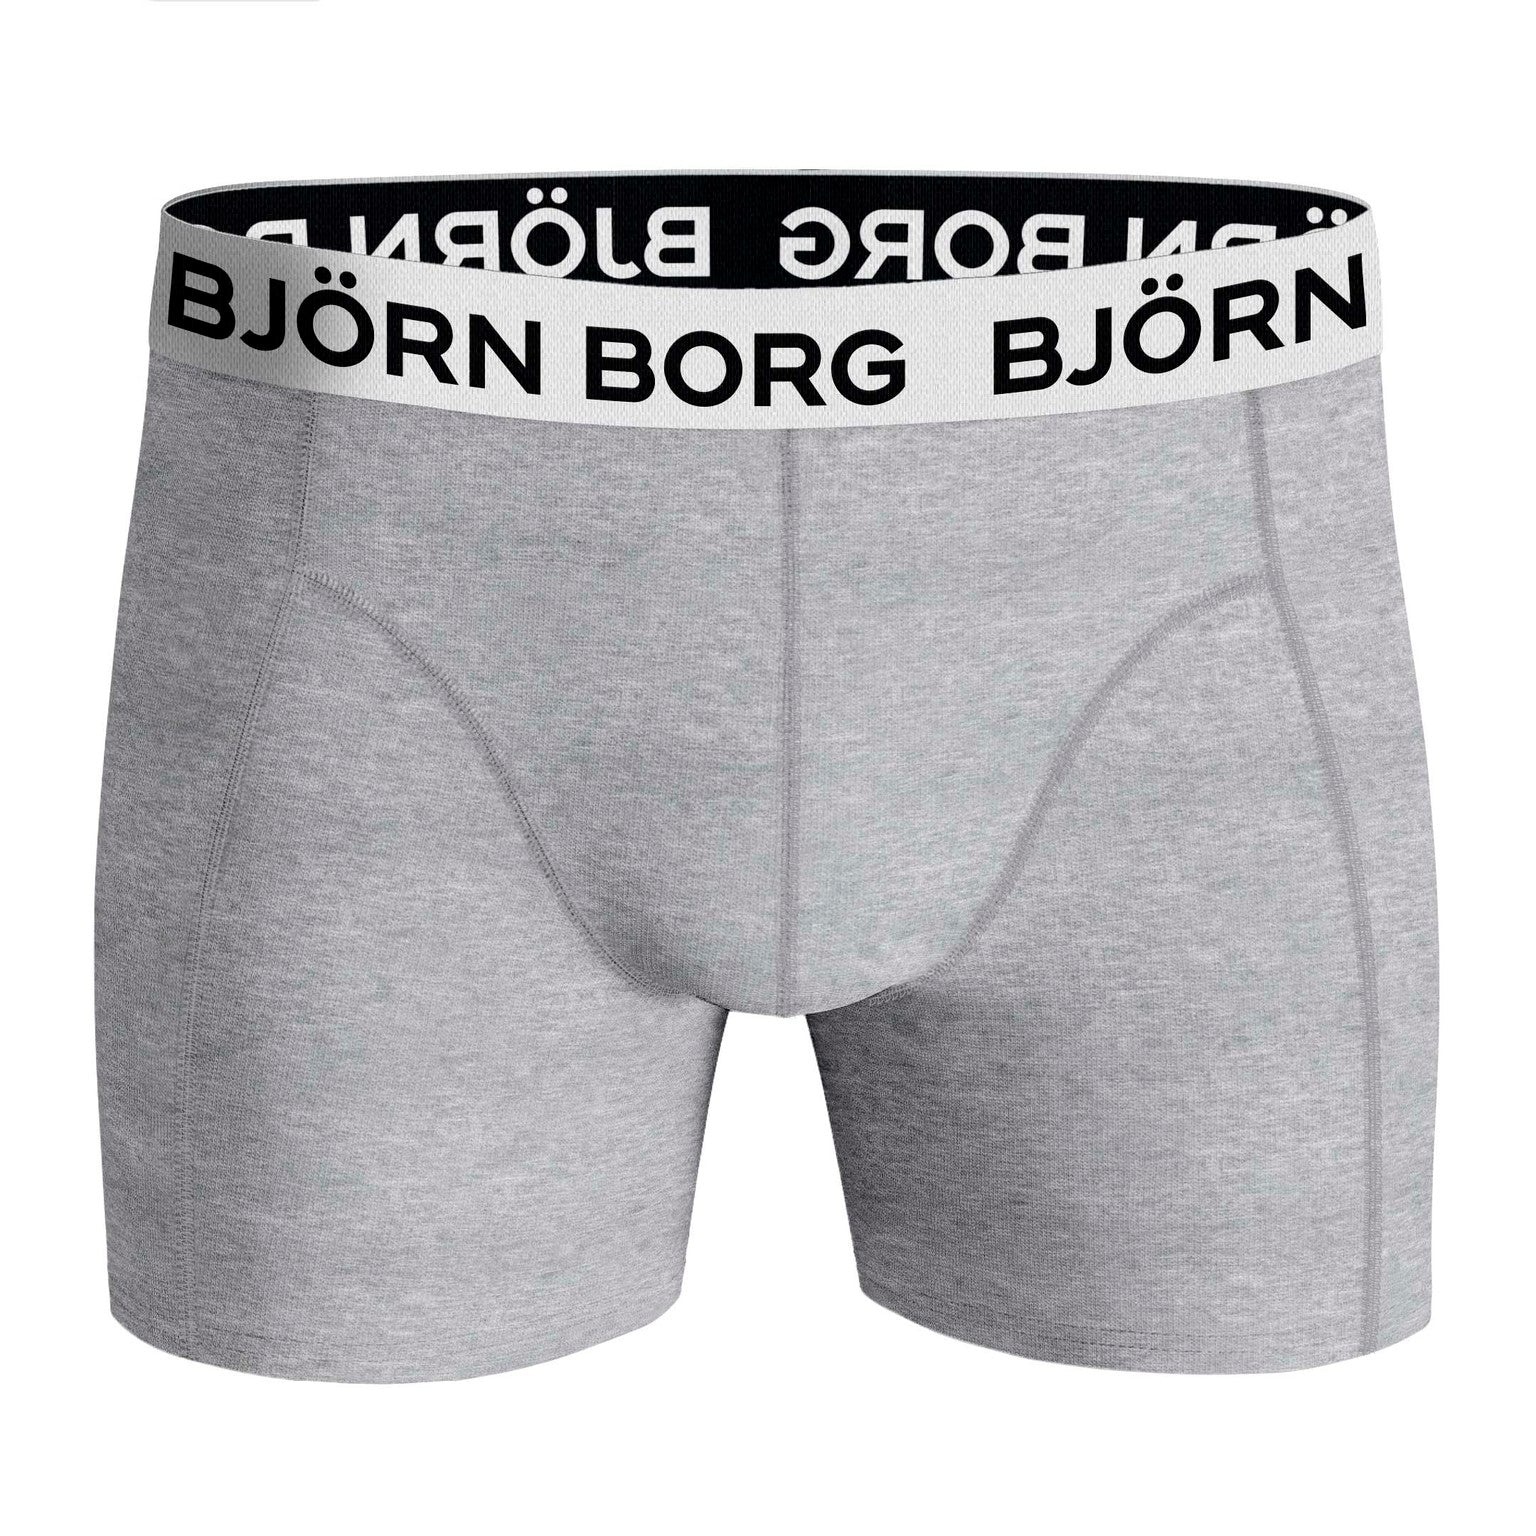 Björn Borg Cotton Stretch boxers - heren boxers normale lengte (2-pack) - multicolor - Maat: S